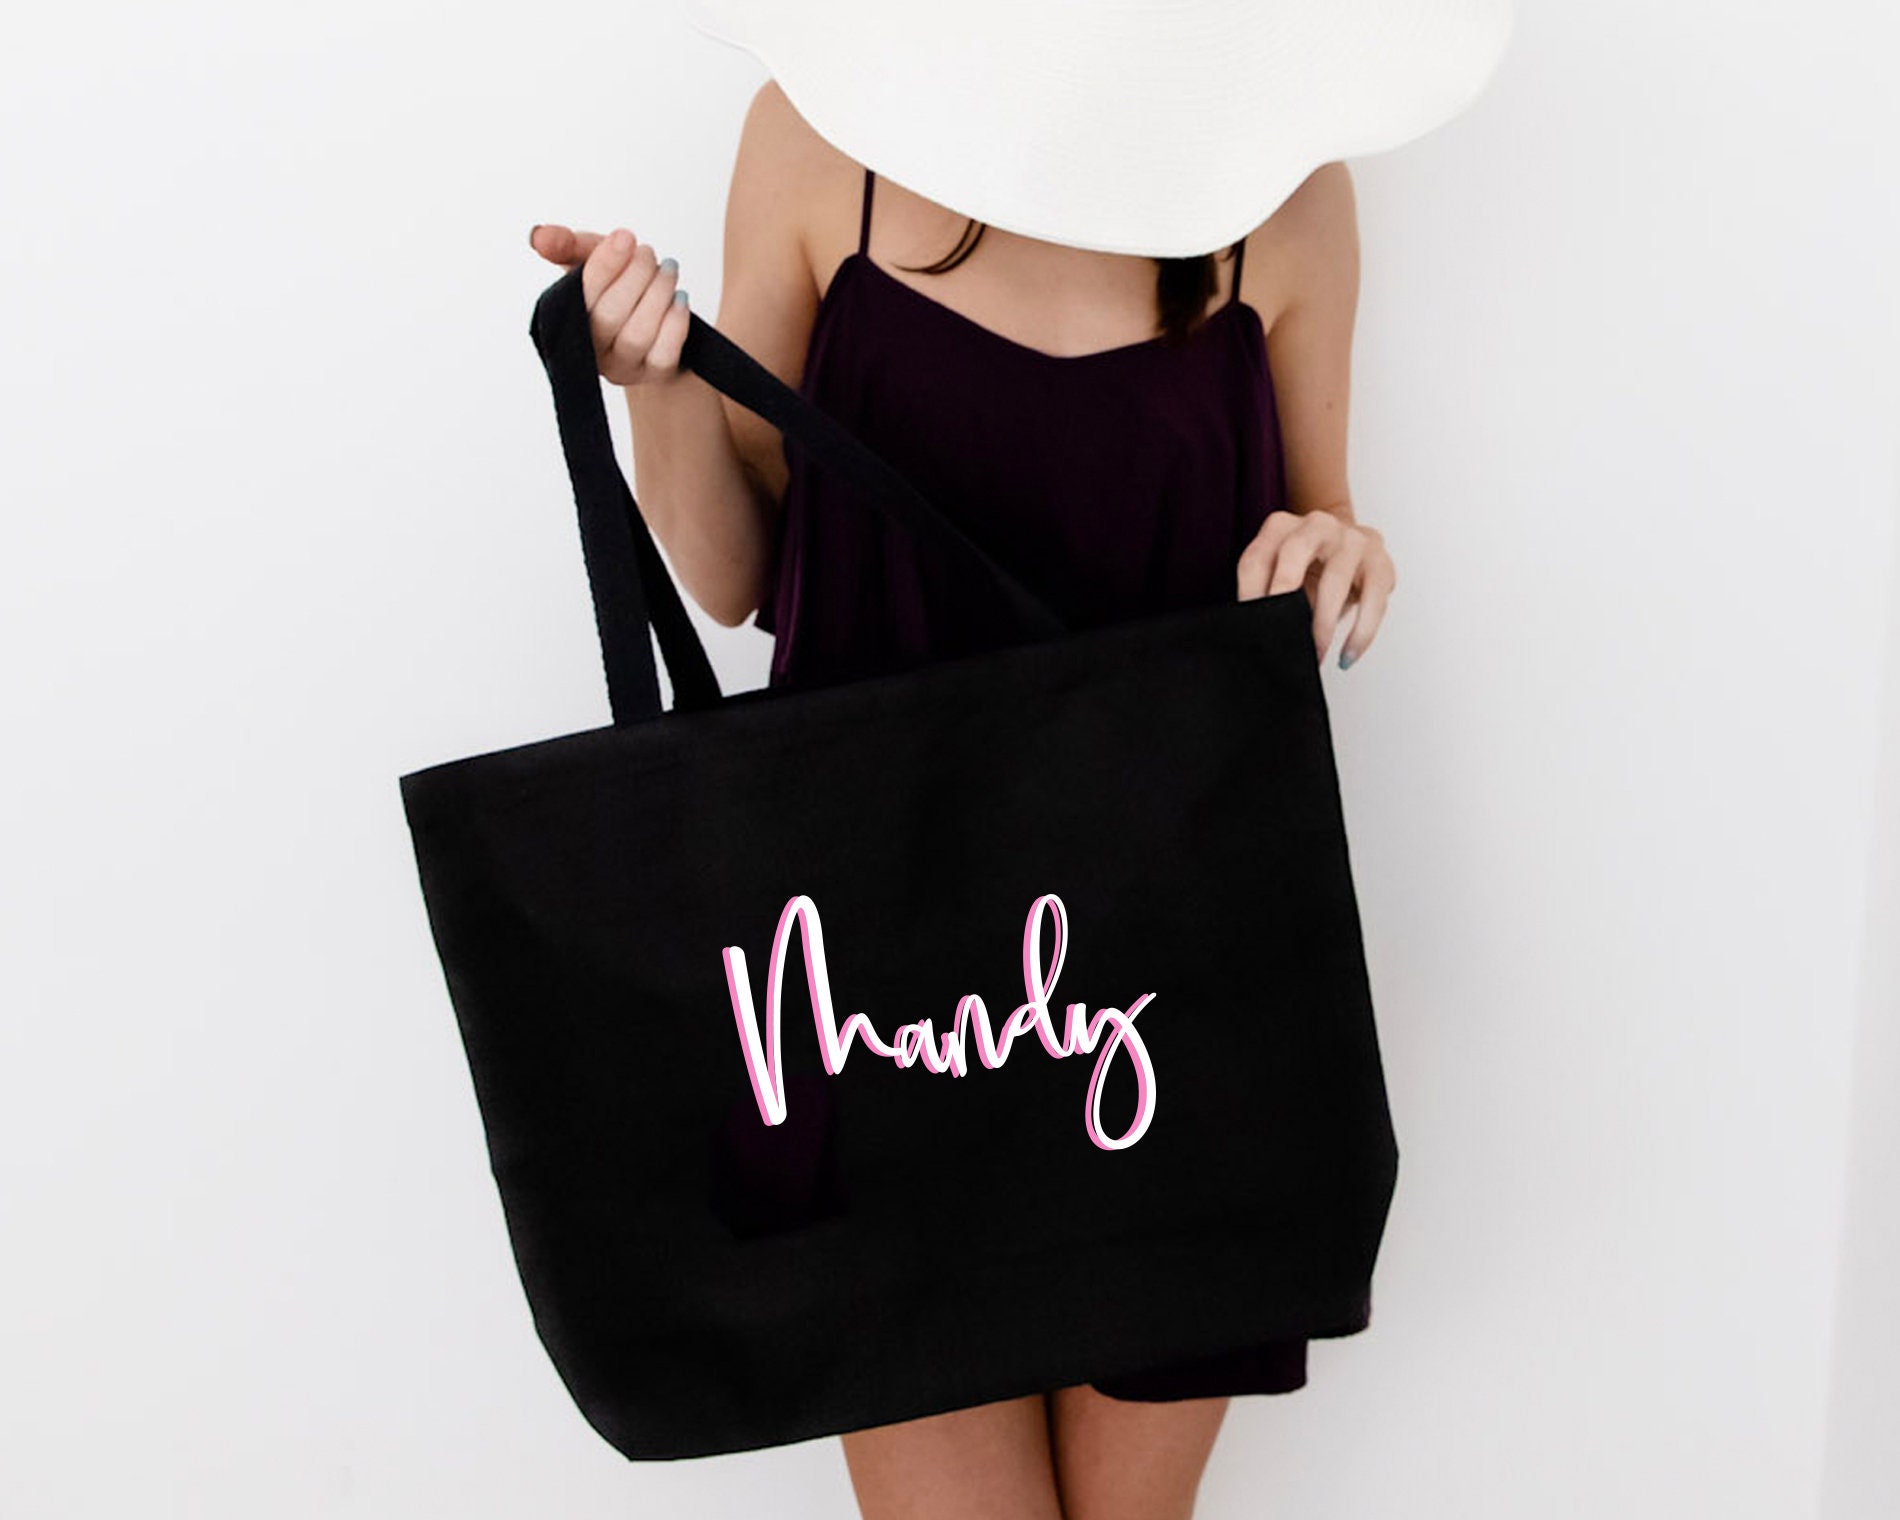 Personalized Name Tote Bag With Colorful Shadow Monogram 